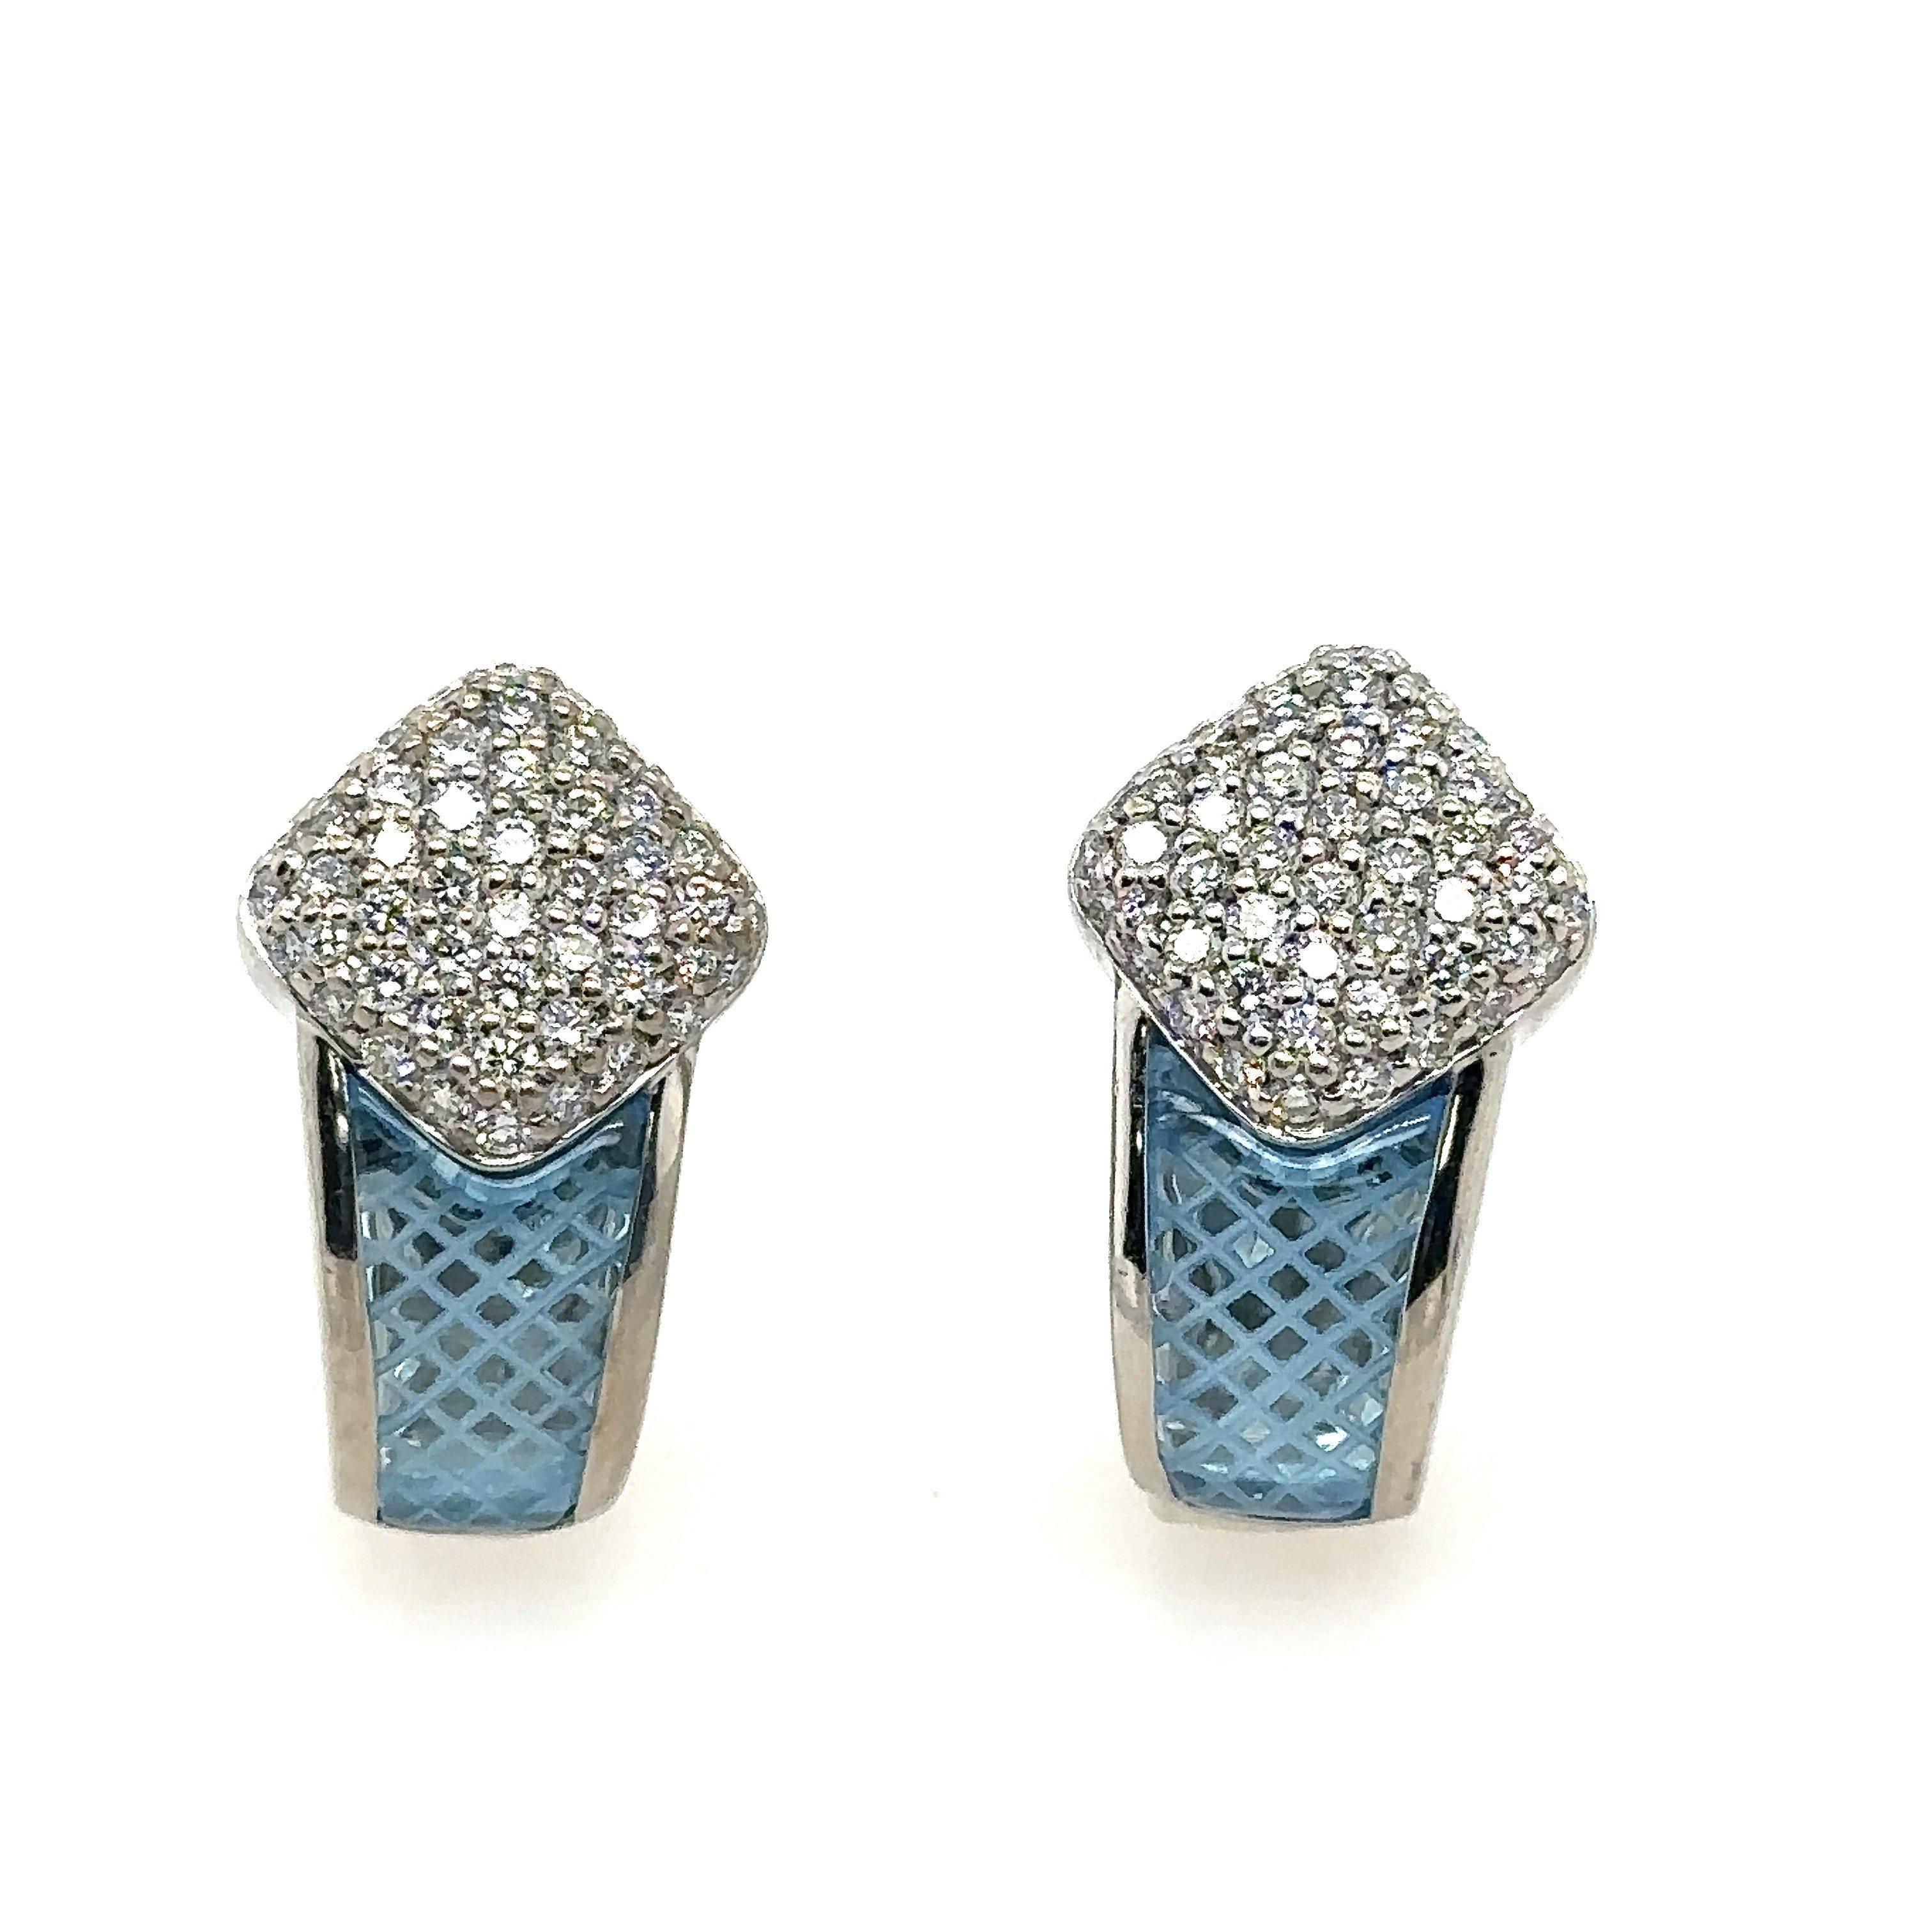 These 18KT white gold and diamond earrings were designed by Robert Wander for WINC creations. The earrings feature approximately 2.5CT round diamond paired with Swiss blue topaz with a unique lattice work etched design. The earrings have versatile